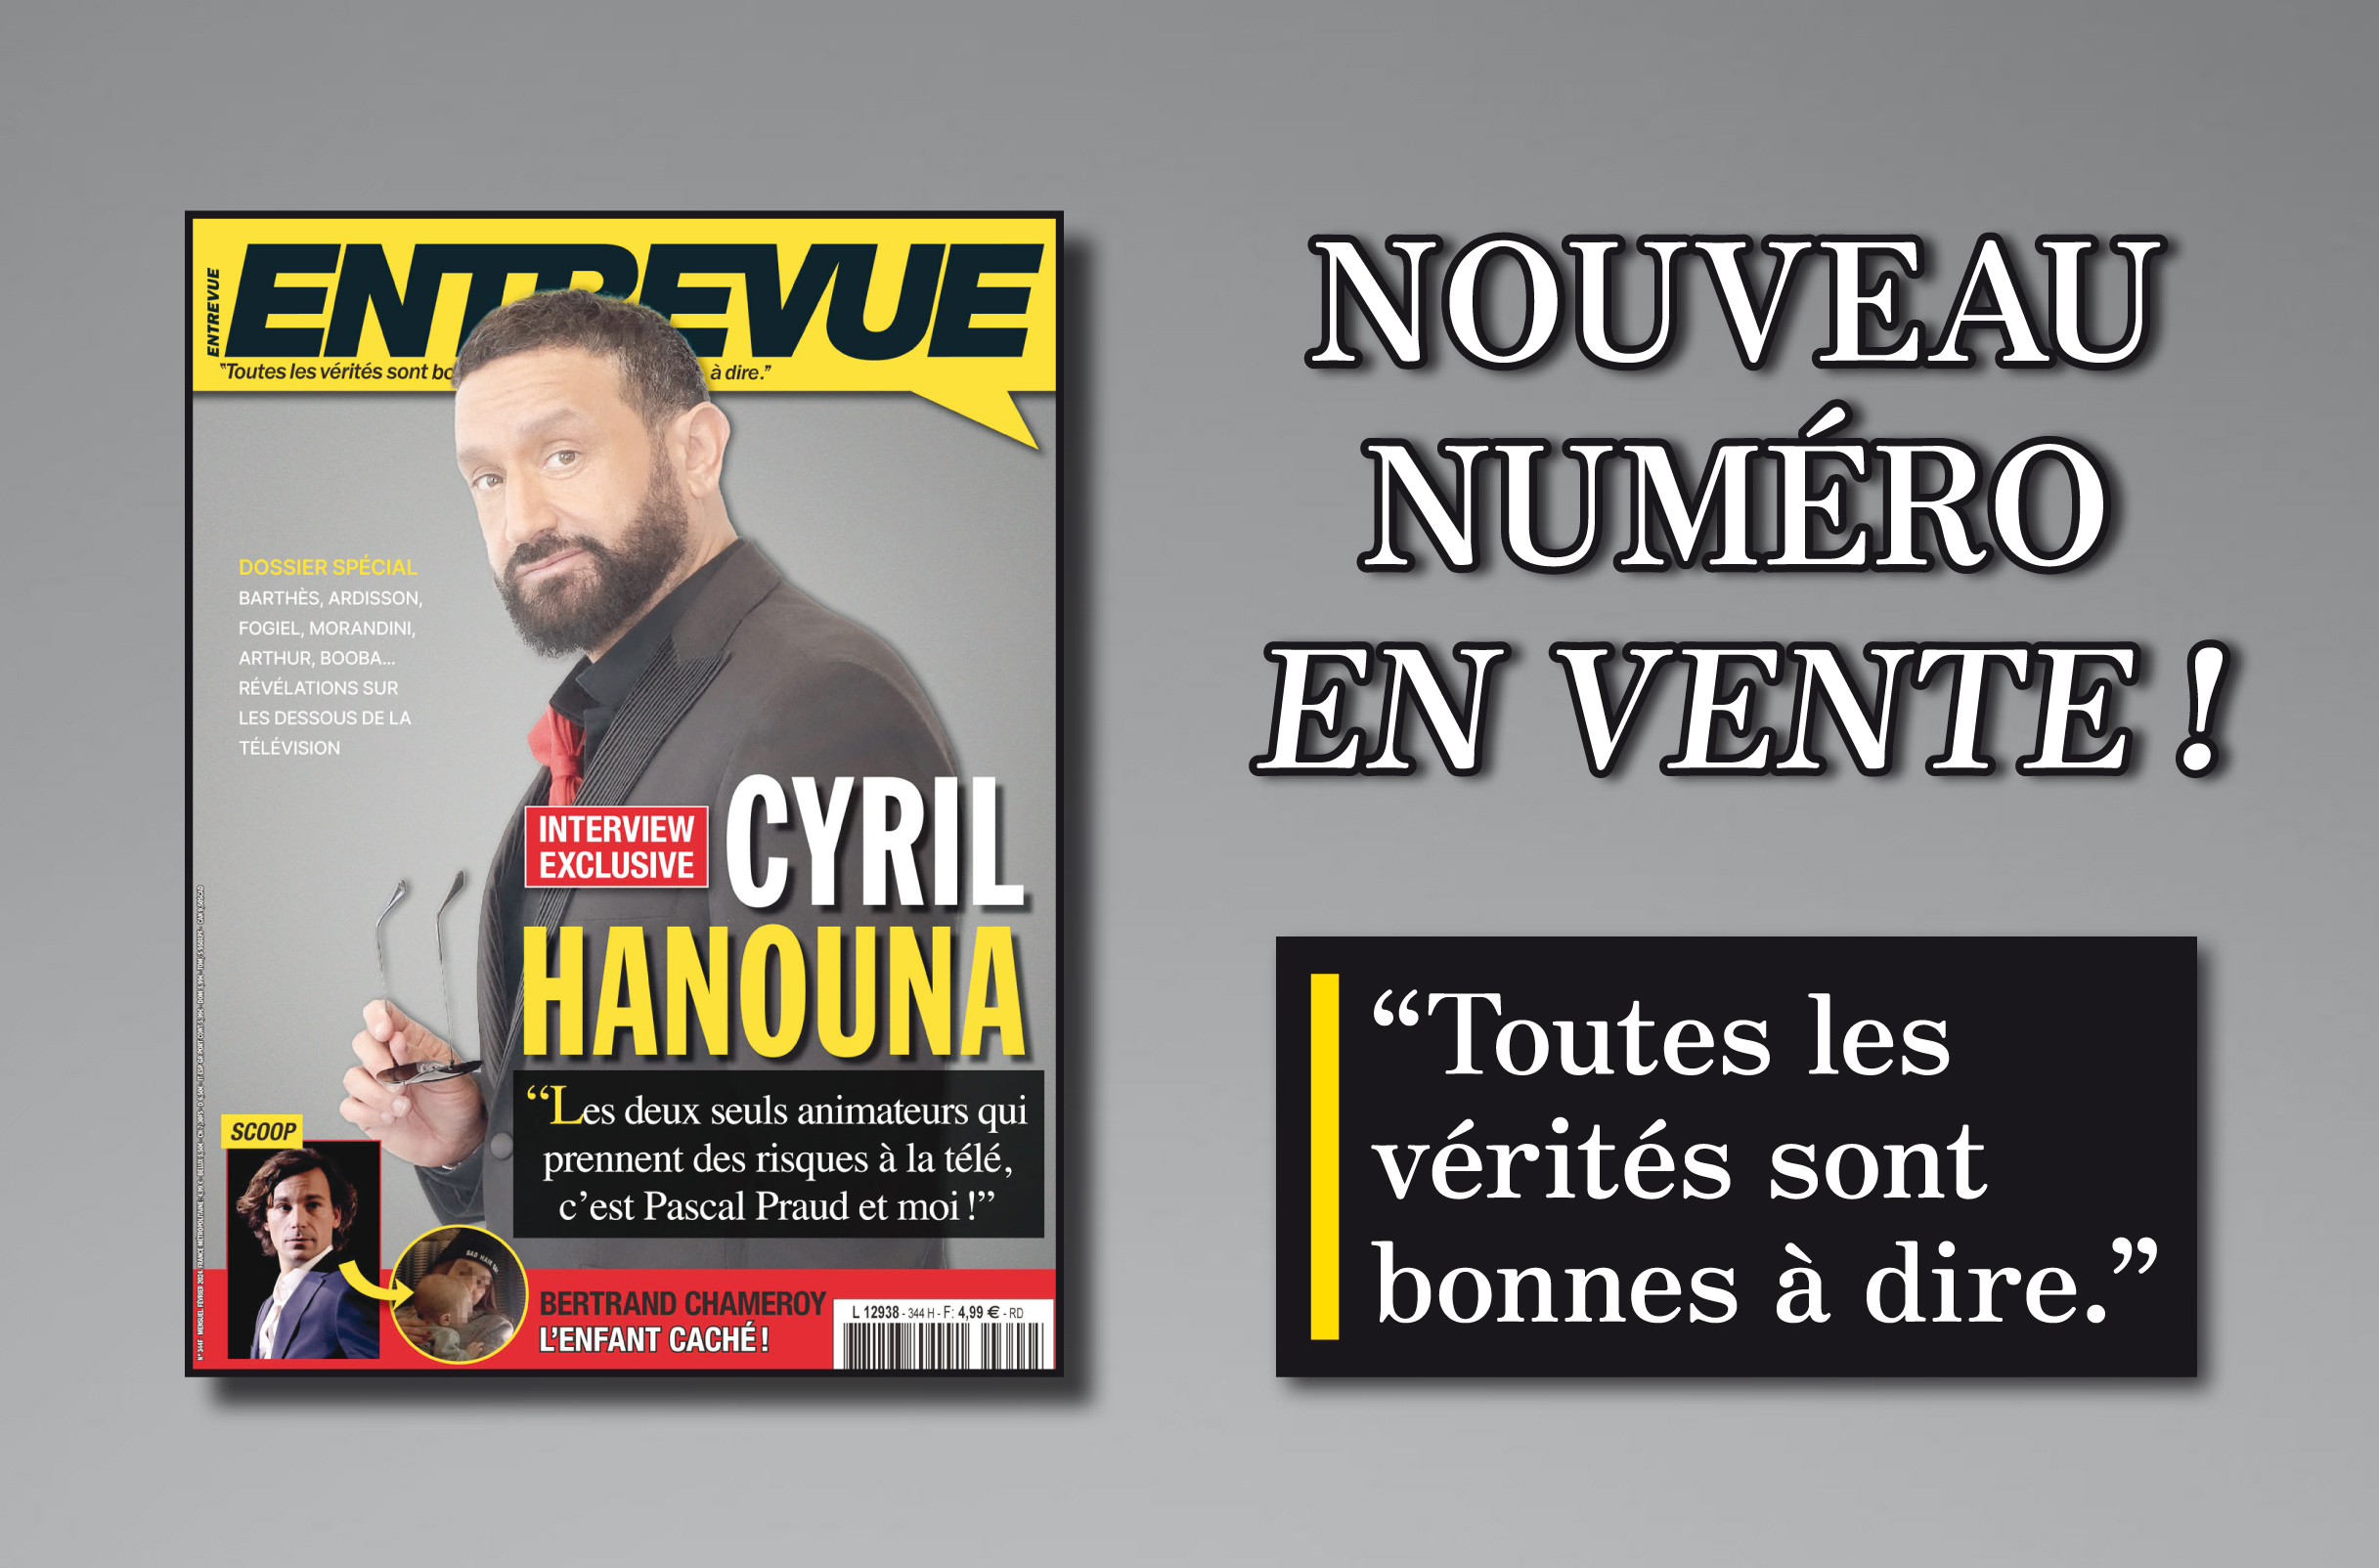 SCOOP – Cyril Hanouna in an exclusive interview and on the cover of the new issue of Entrevue, on sale since February 8!